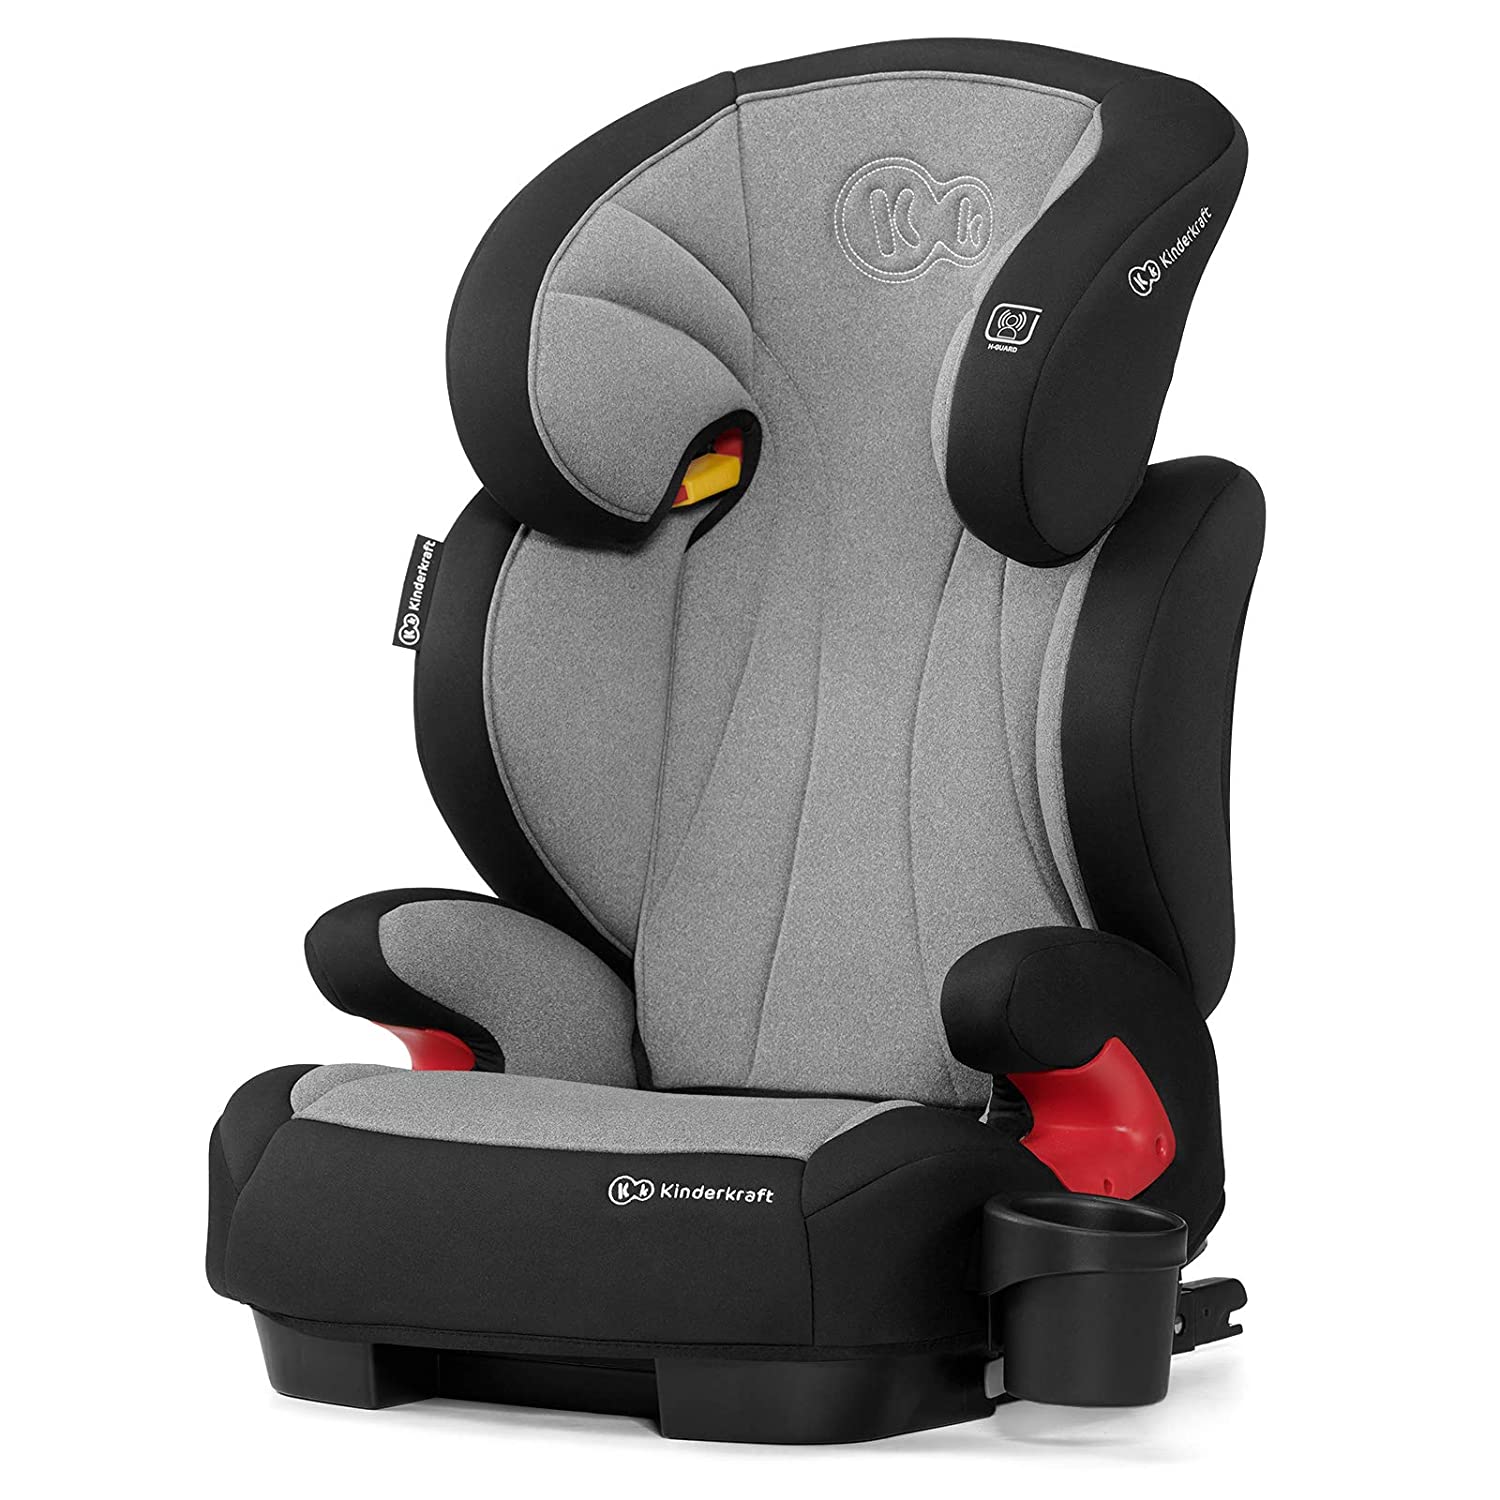 Kinderkraft Unity Child Car Seat, Child Car Seat, Child Seat with Isofix, Width and Height Adjustable, Group 2/3 15-36 kg, Grows with the Child, Intertek and ECE R44/04, Black